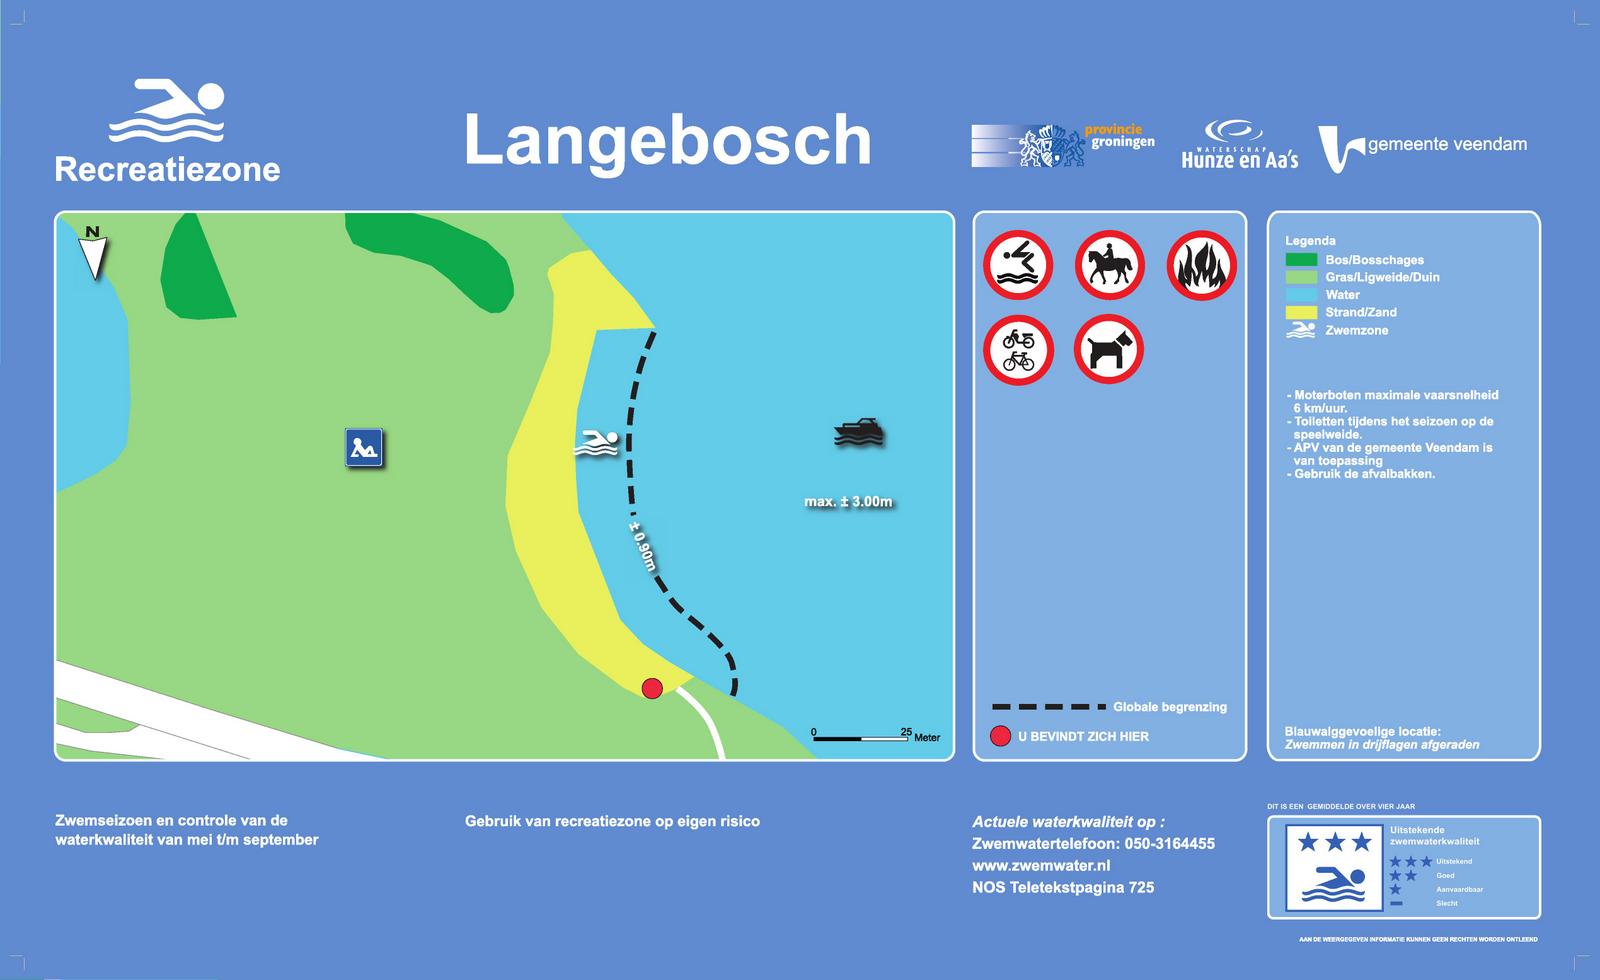 The information board at the swimming location Langebosch, Borgerswold Veendam